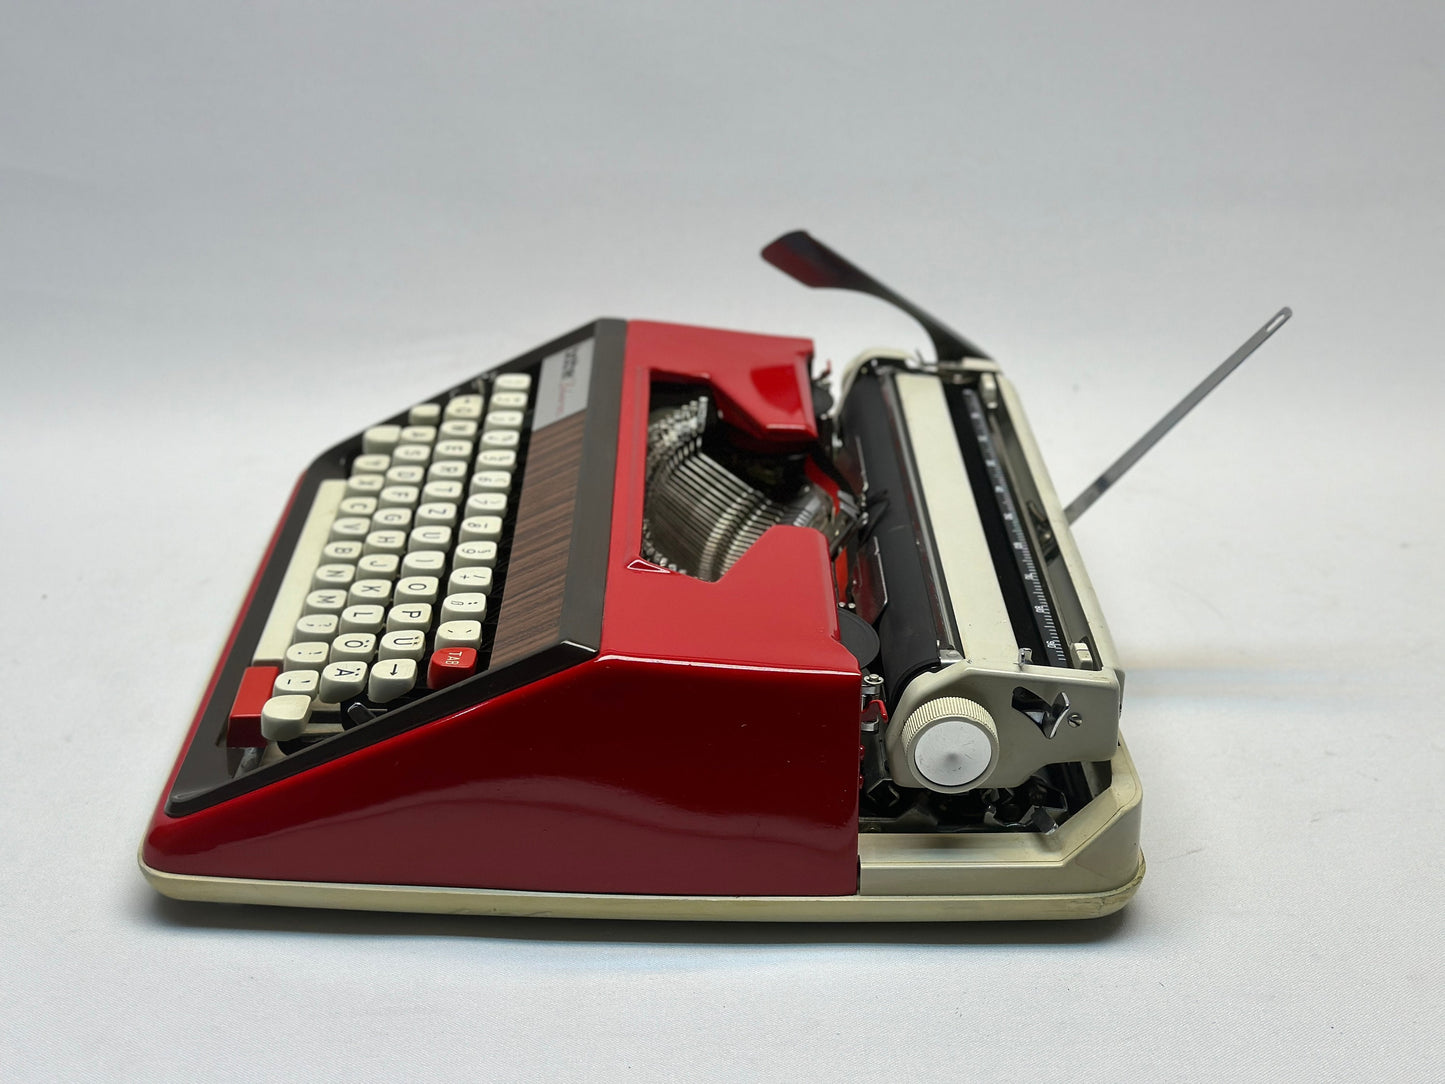 Embrace Vintage Luxury with the Brother Deluxe Typewriter - Red Body, White Bag, Antique Elegance